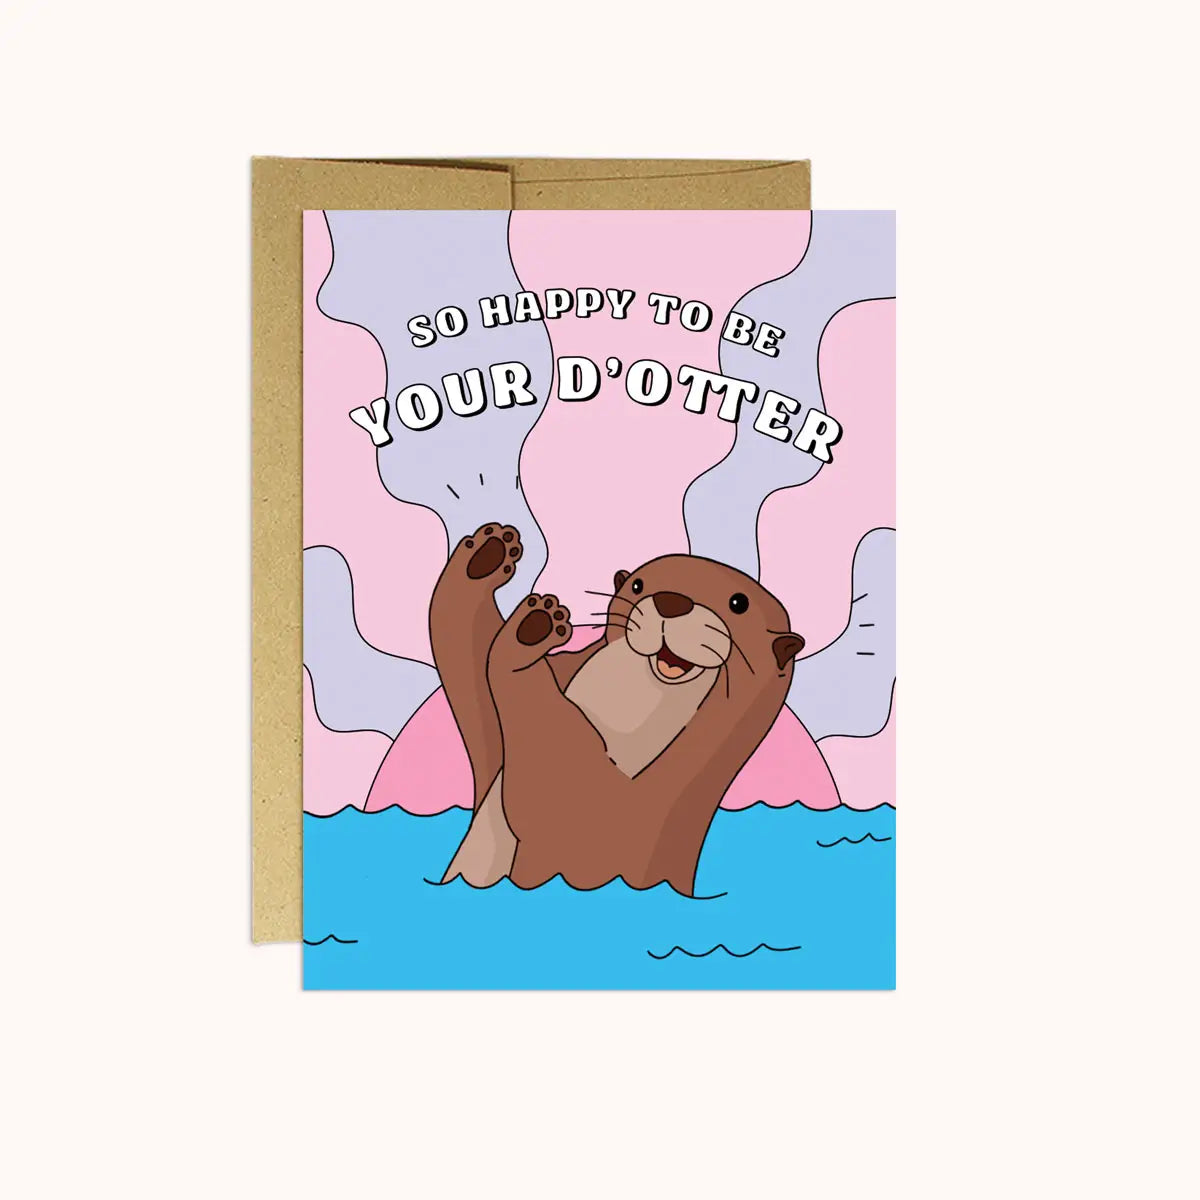 So Happy to be Your D’Otter Card